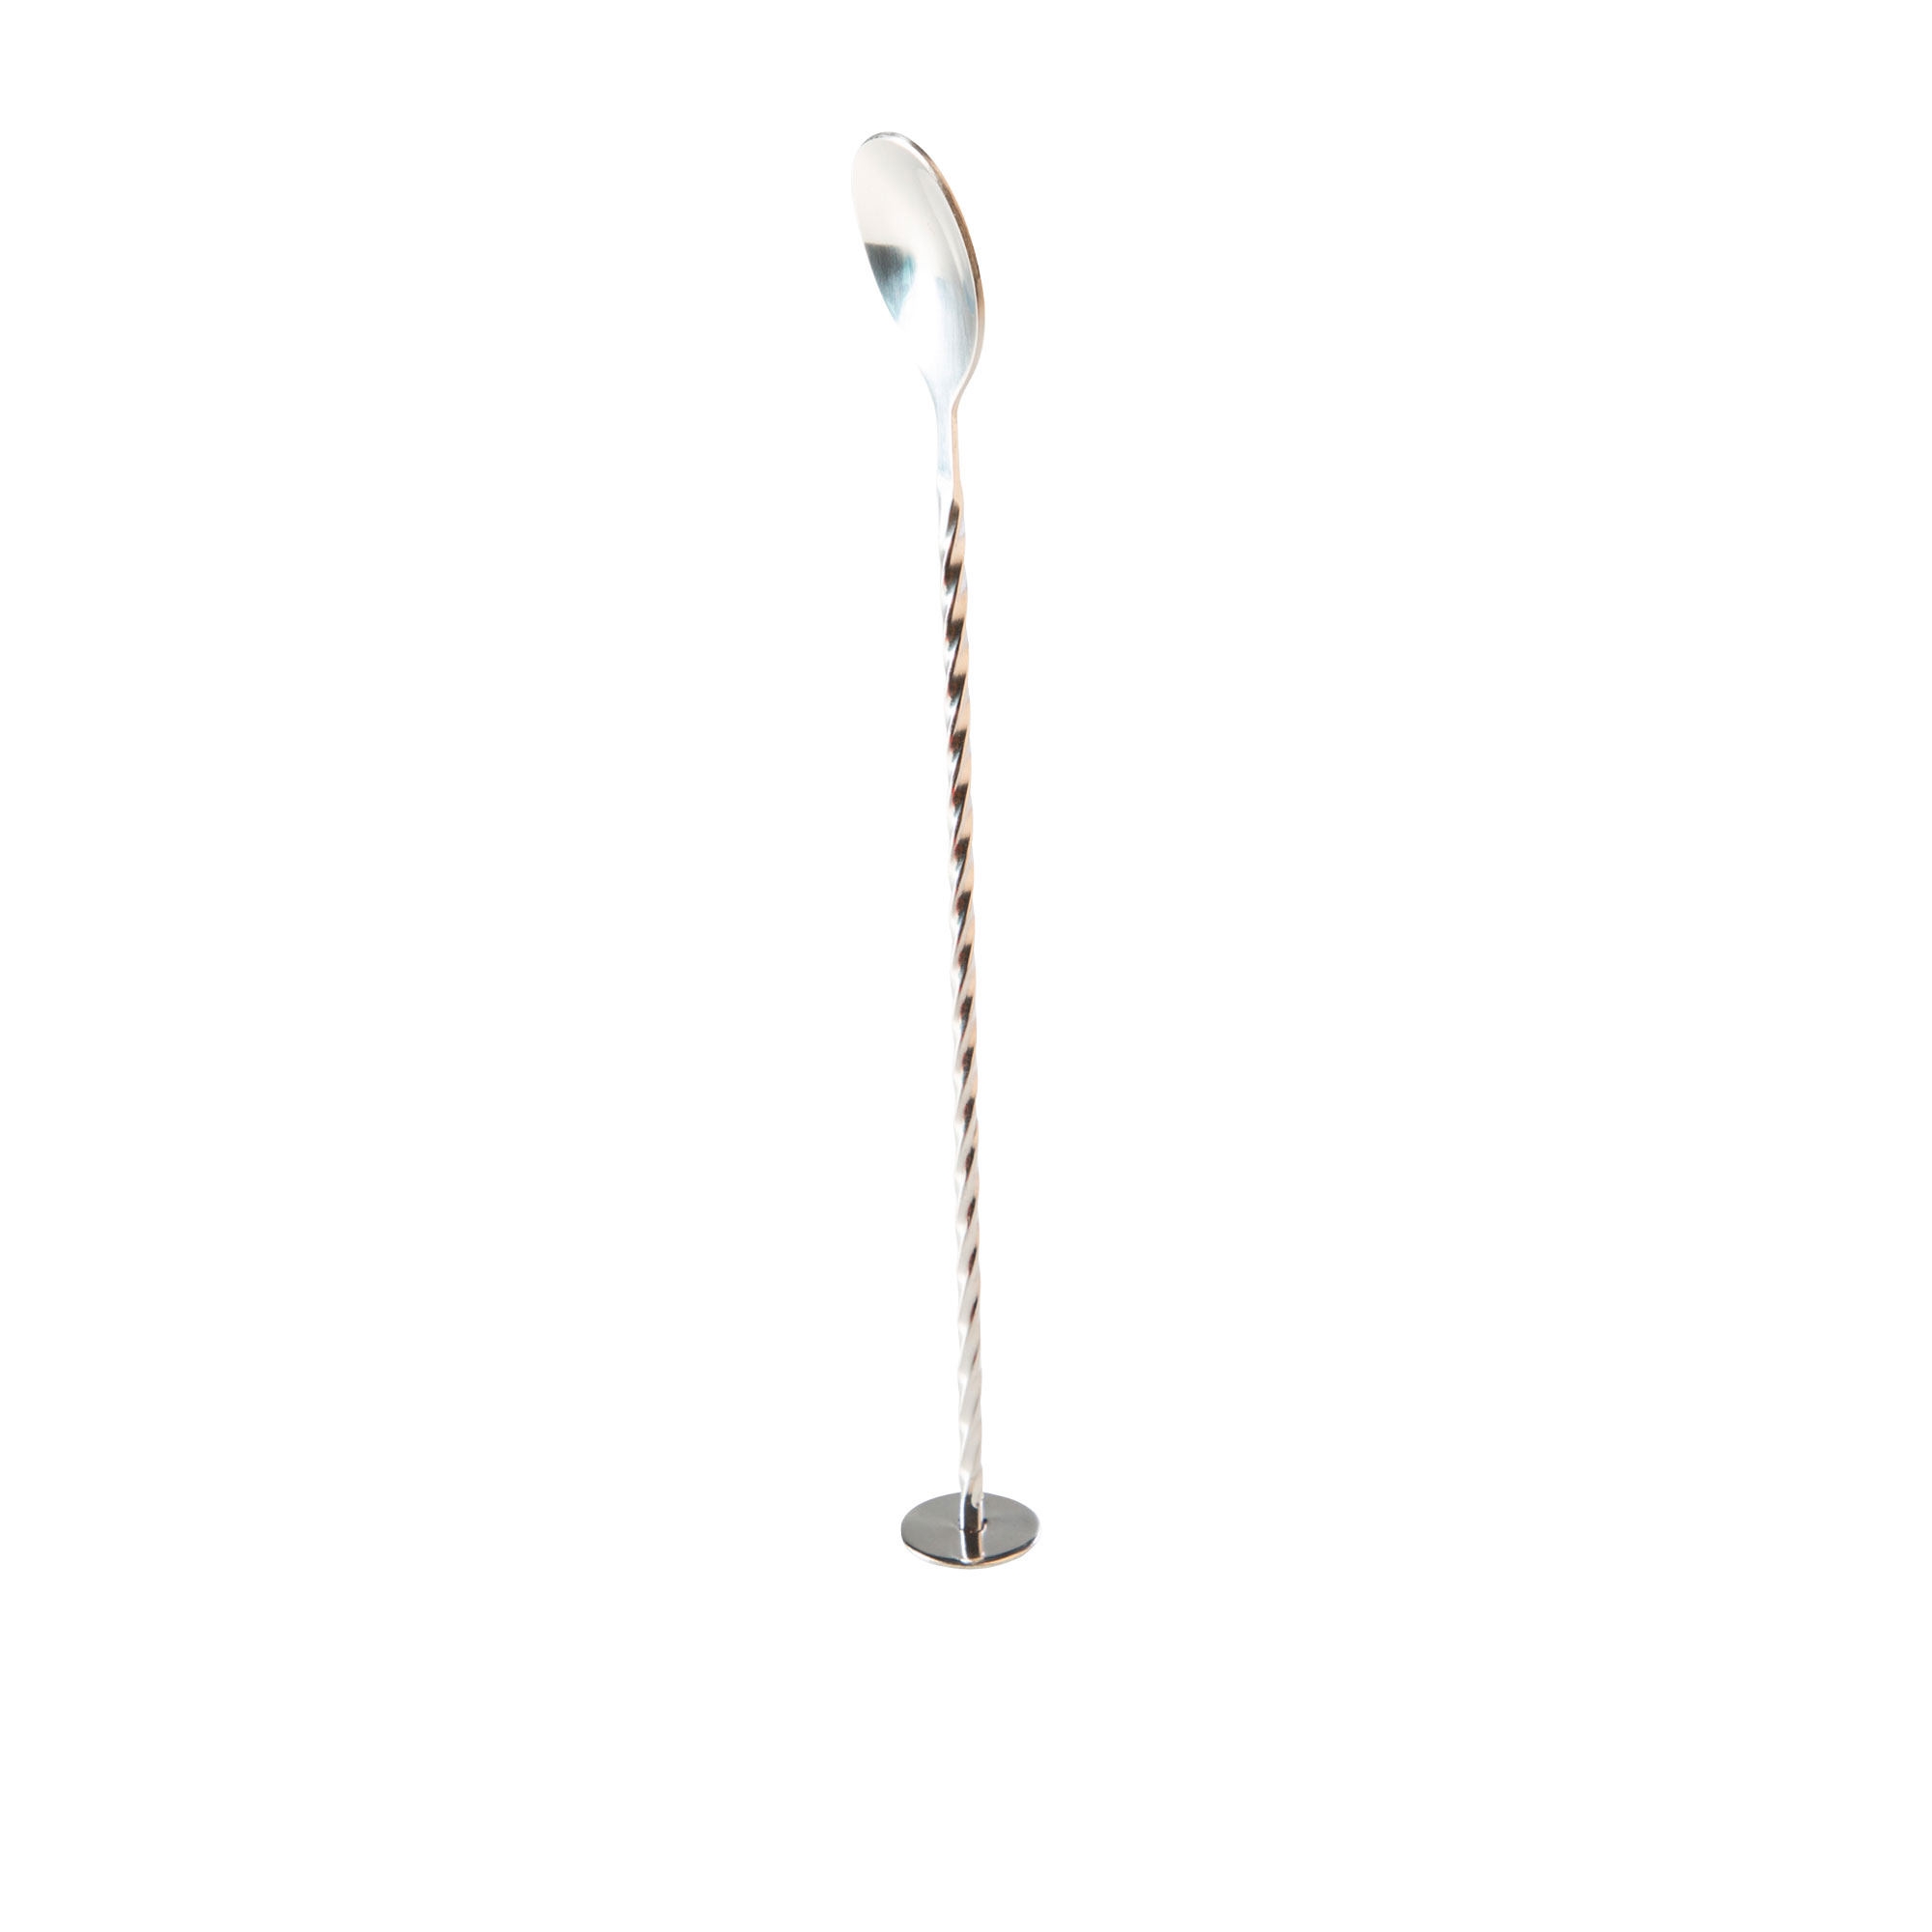 Winex Stainless Steel Bar Spoon and Muddler Image 2